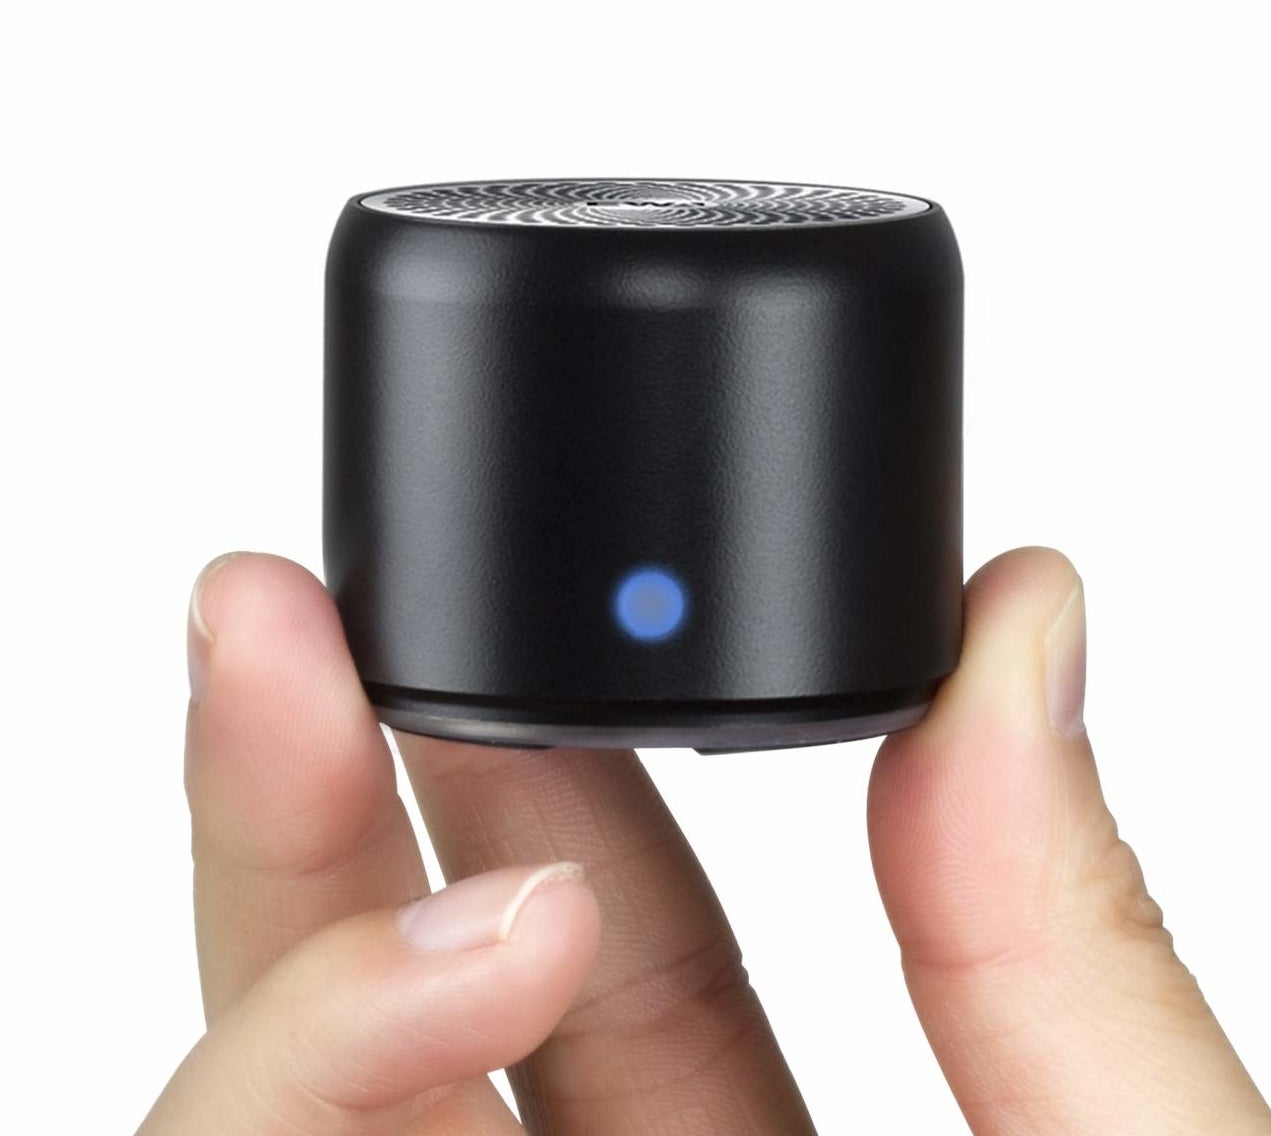 A person holding the small cylindrical speaker between their fingers